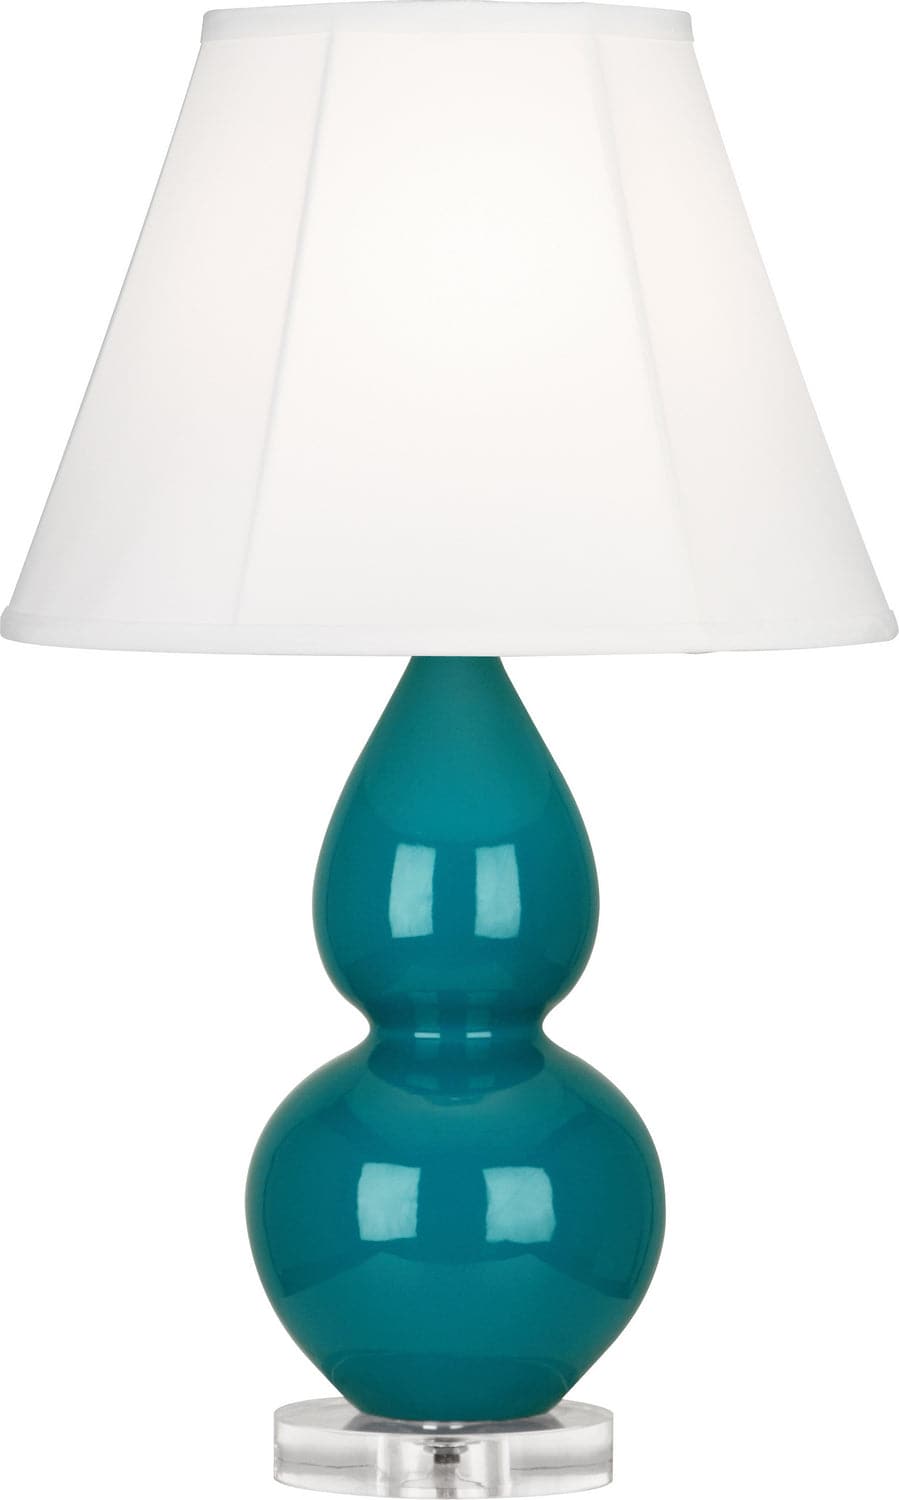 Robert Abbey - A773 - One Light Accent Lamp - Small Double Gourd - Peacock Glazed w/Lucite Base